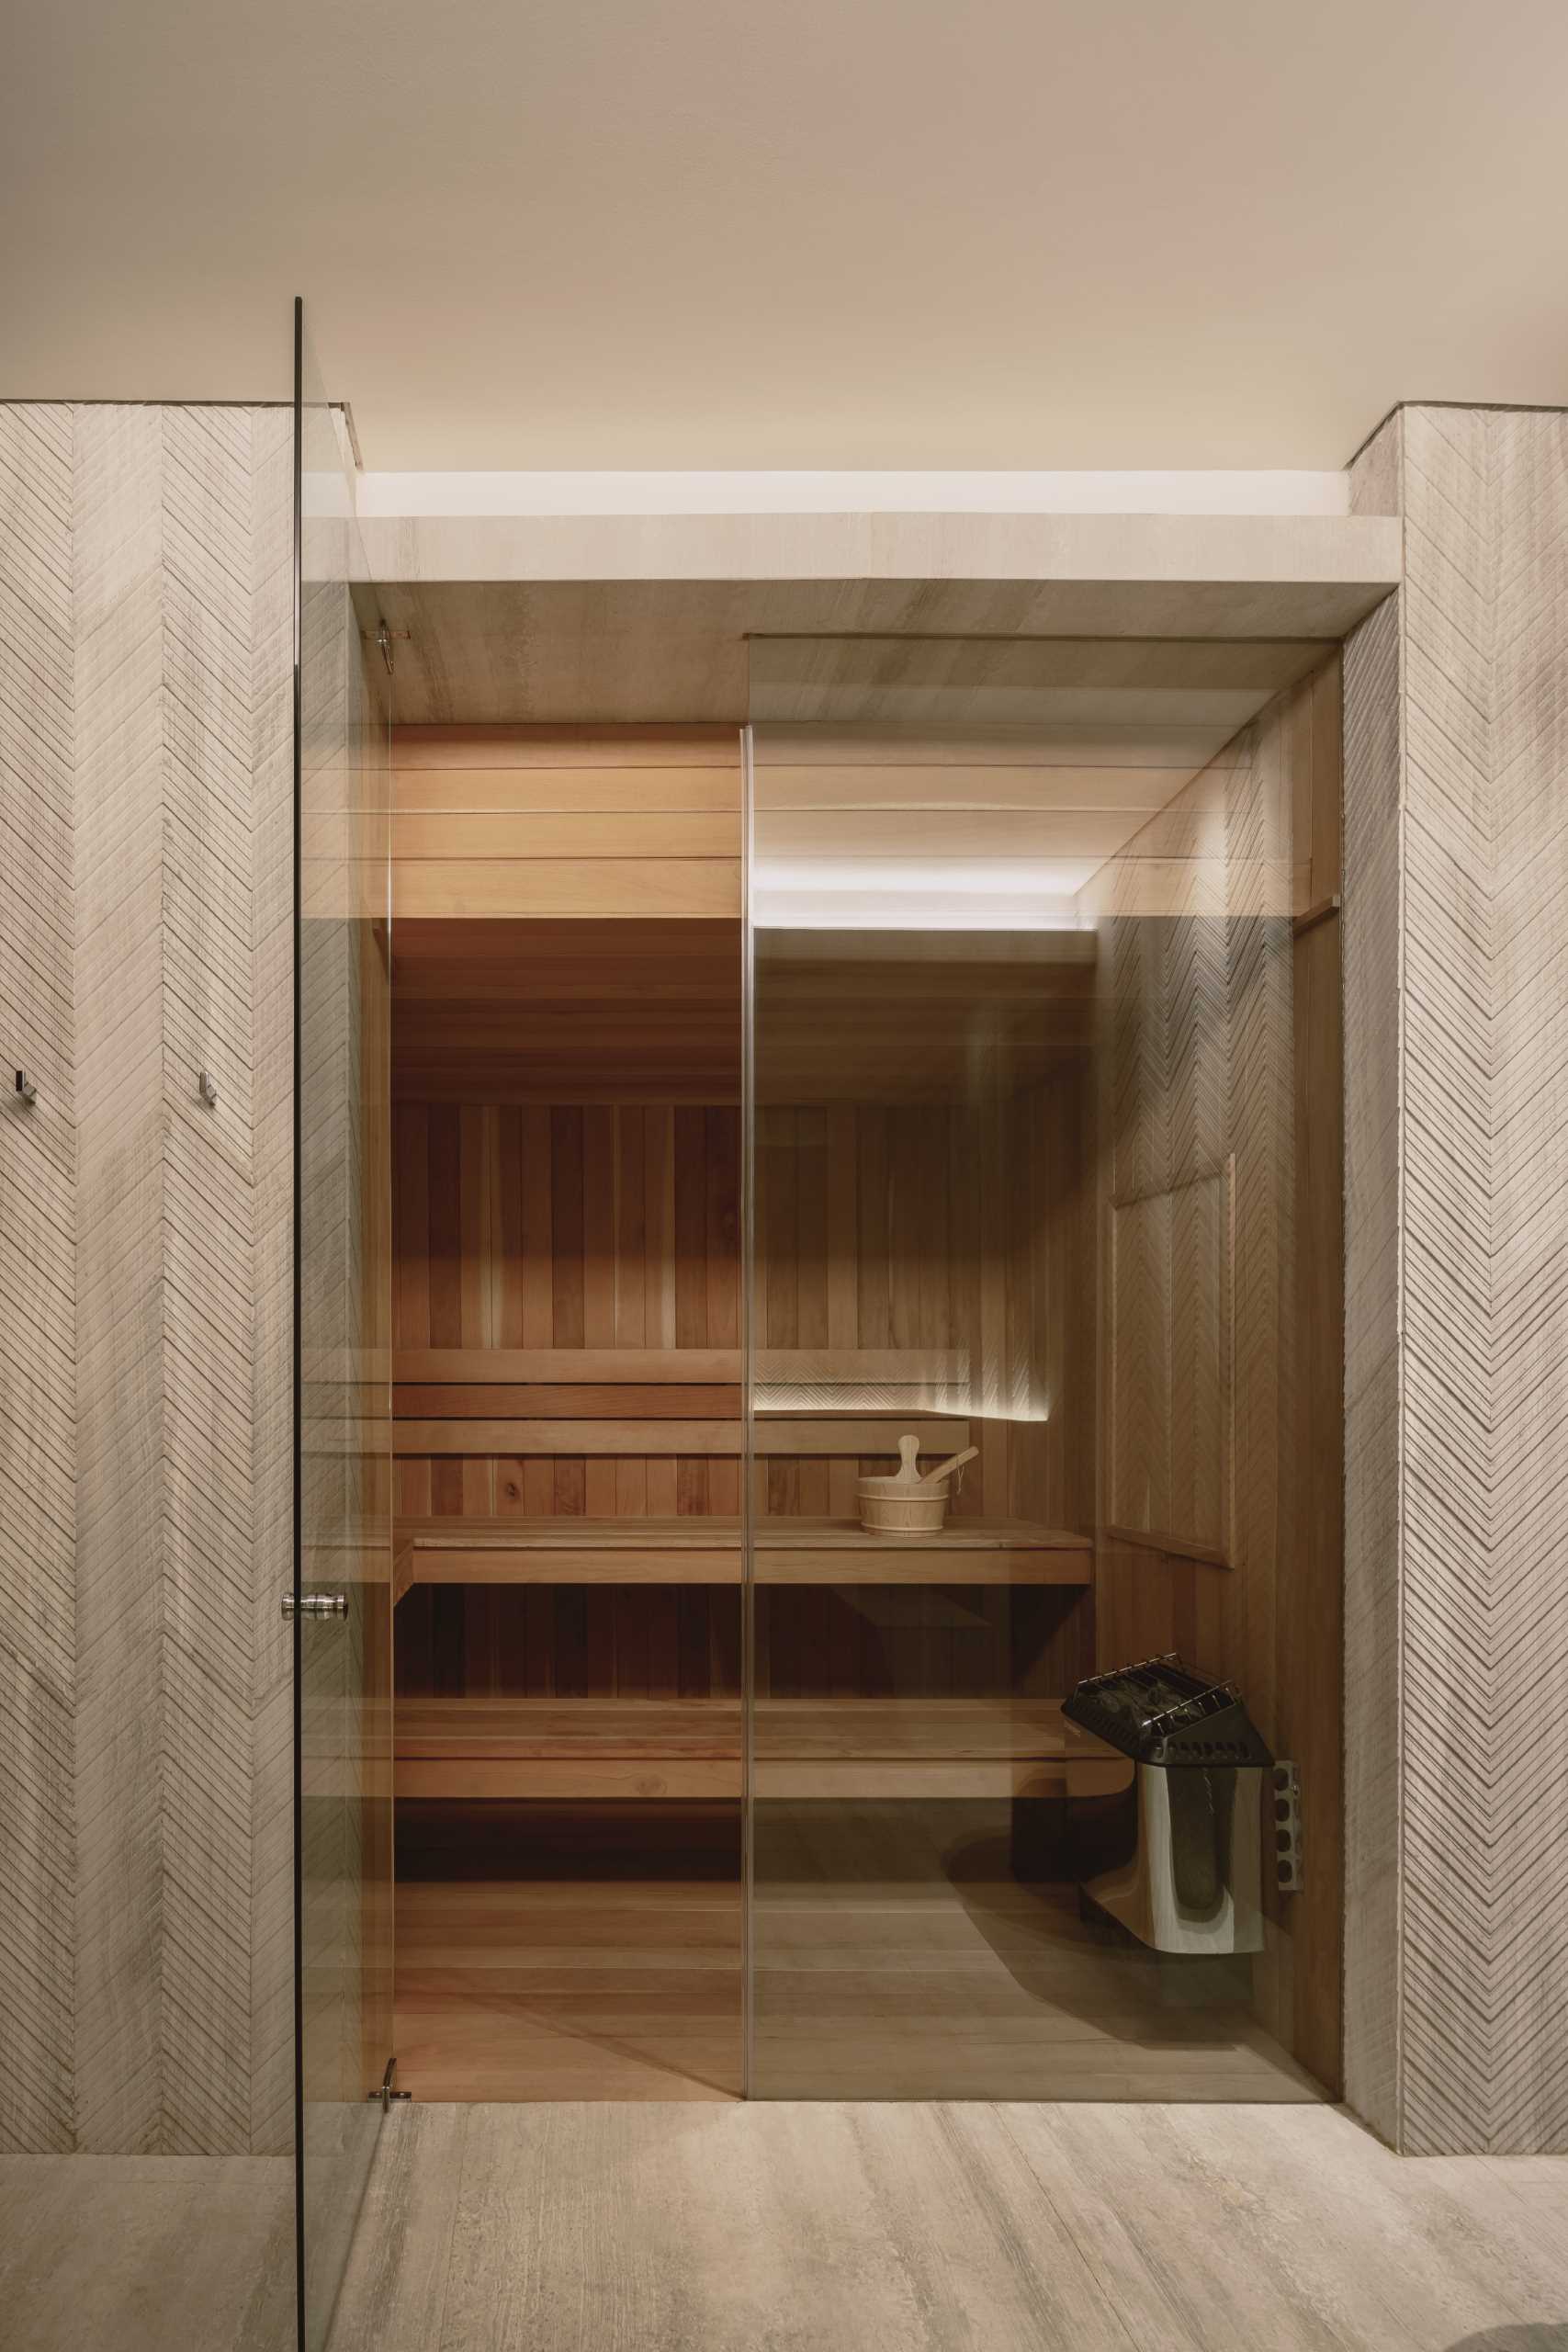 A modern home with a wood-lined sauna that has a glass door.